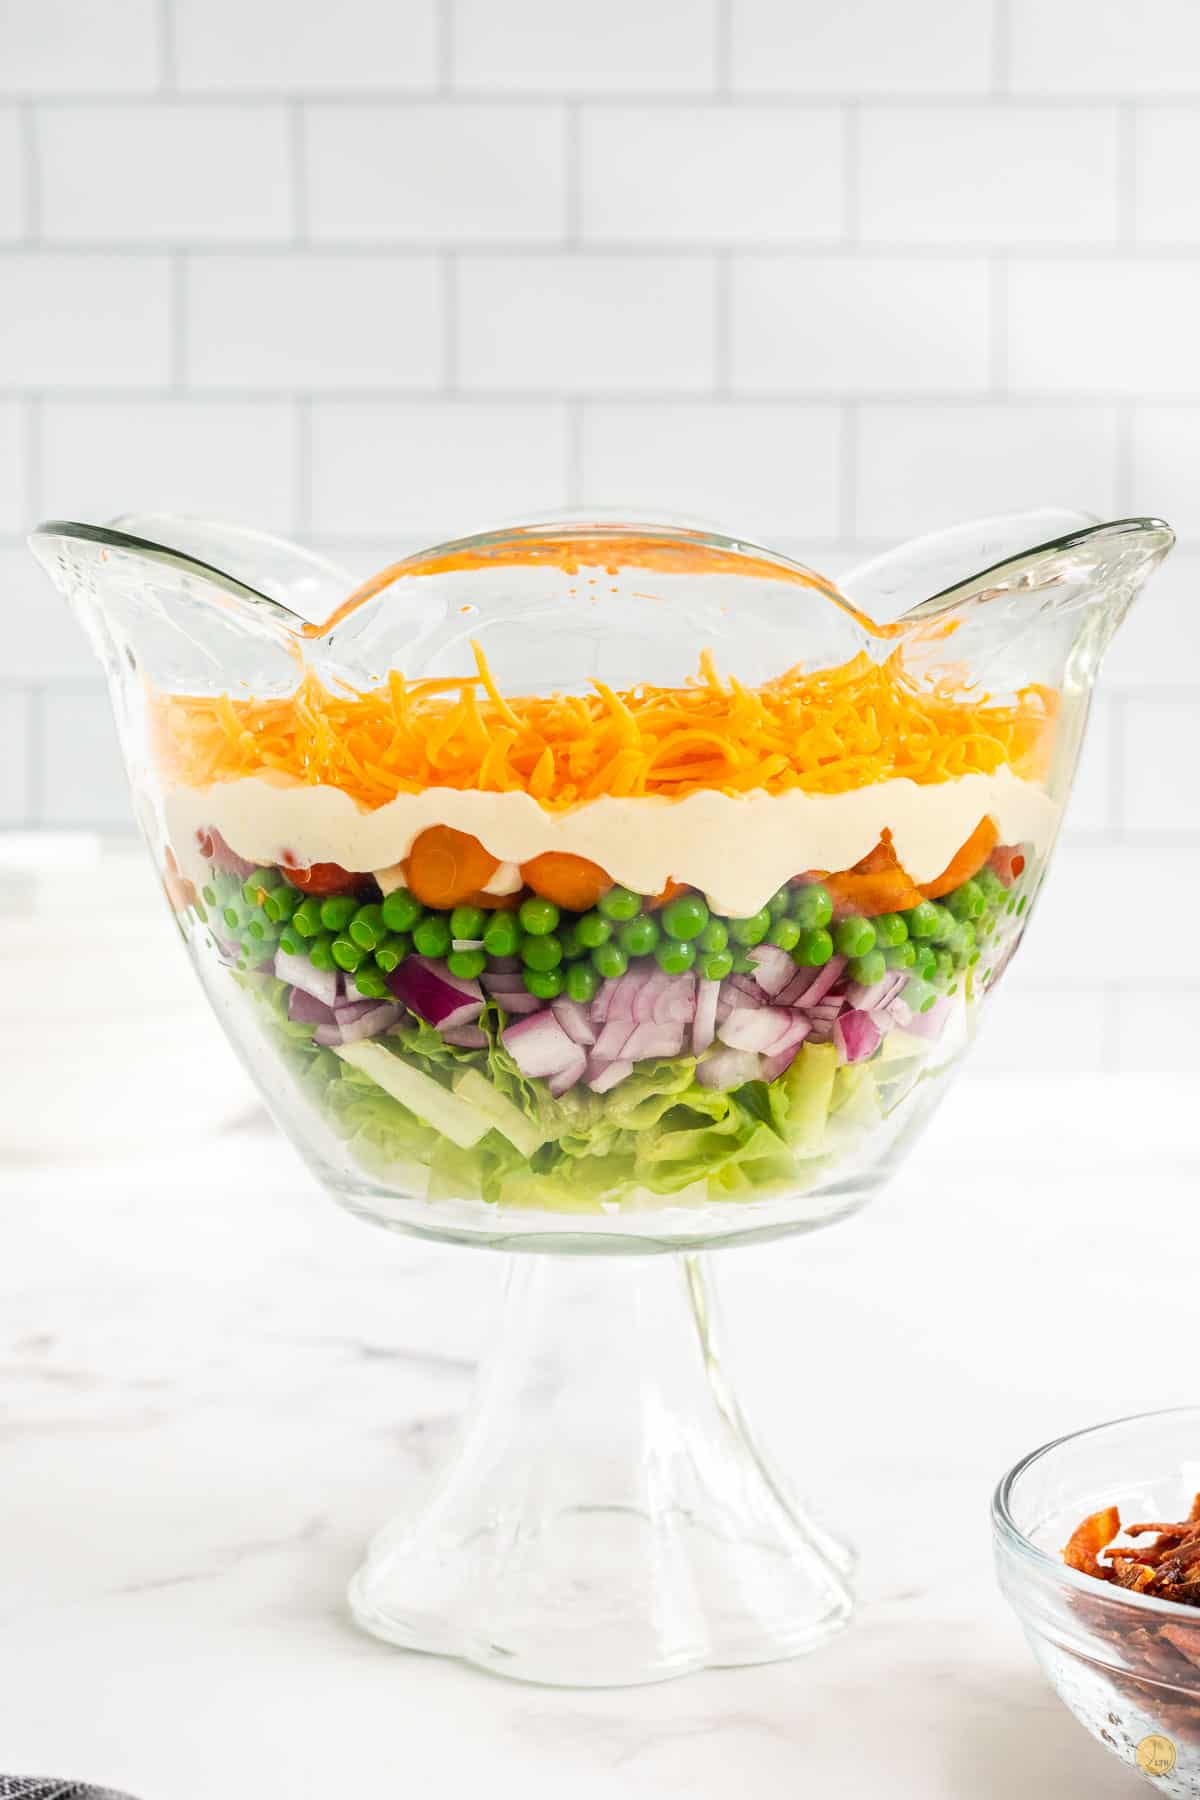 6 layers of salad in a bowl